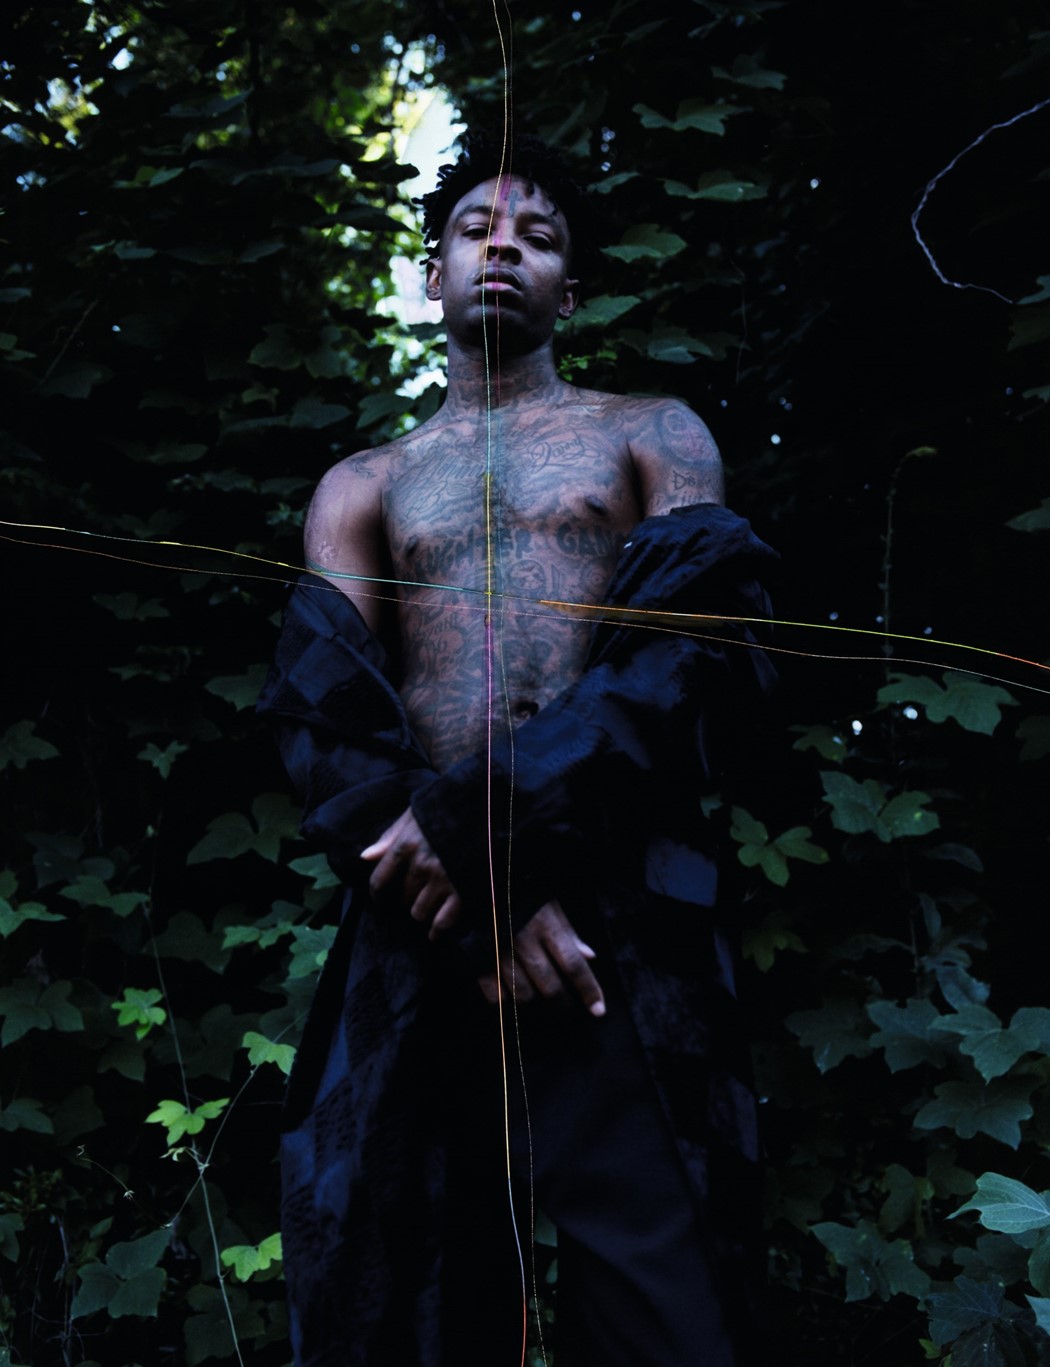 21 Savage Another Man Harley Weir 2019 cover fashion style